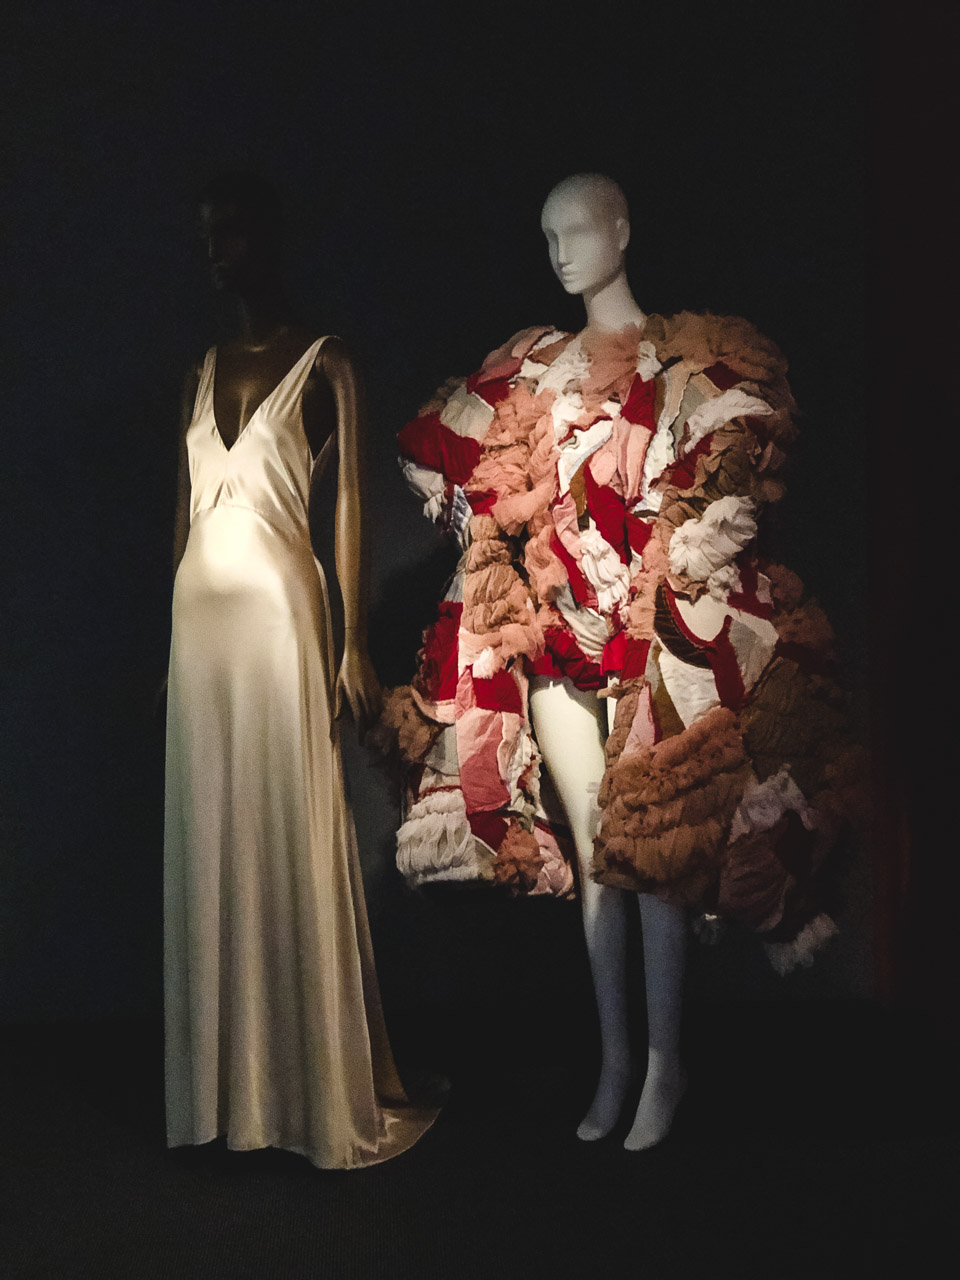 Dresses on display at the Museum at the Fashion Institute of Technology in New York